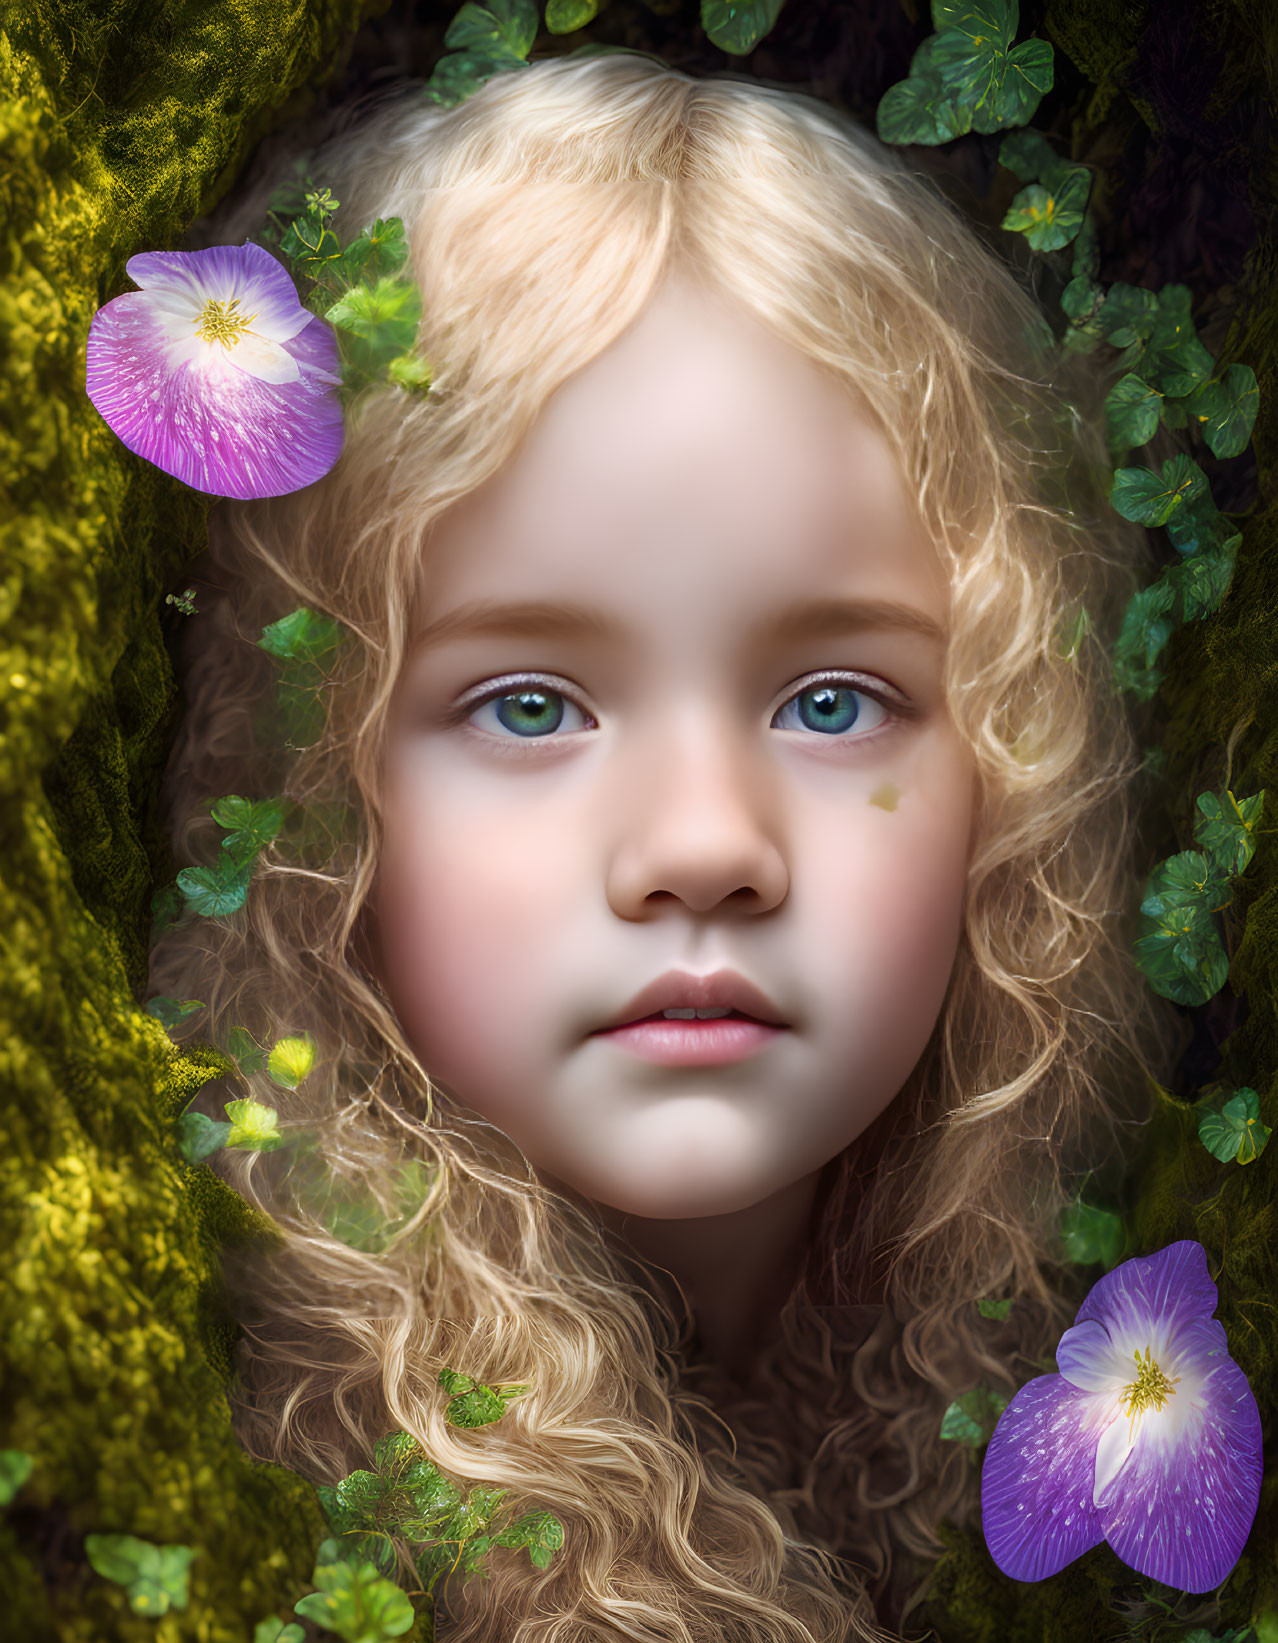 Young child with blonde hair and blue eyes in nature setting with flowers and leaves.